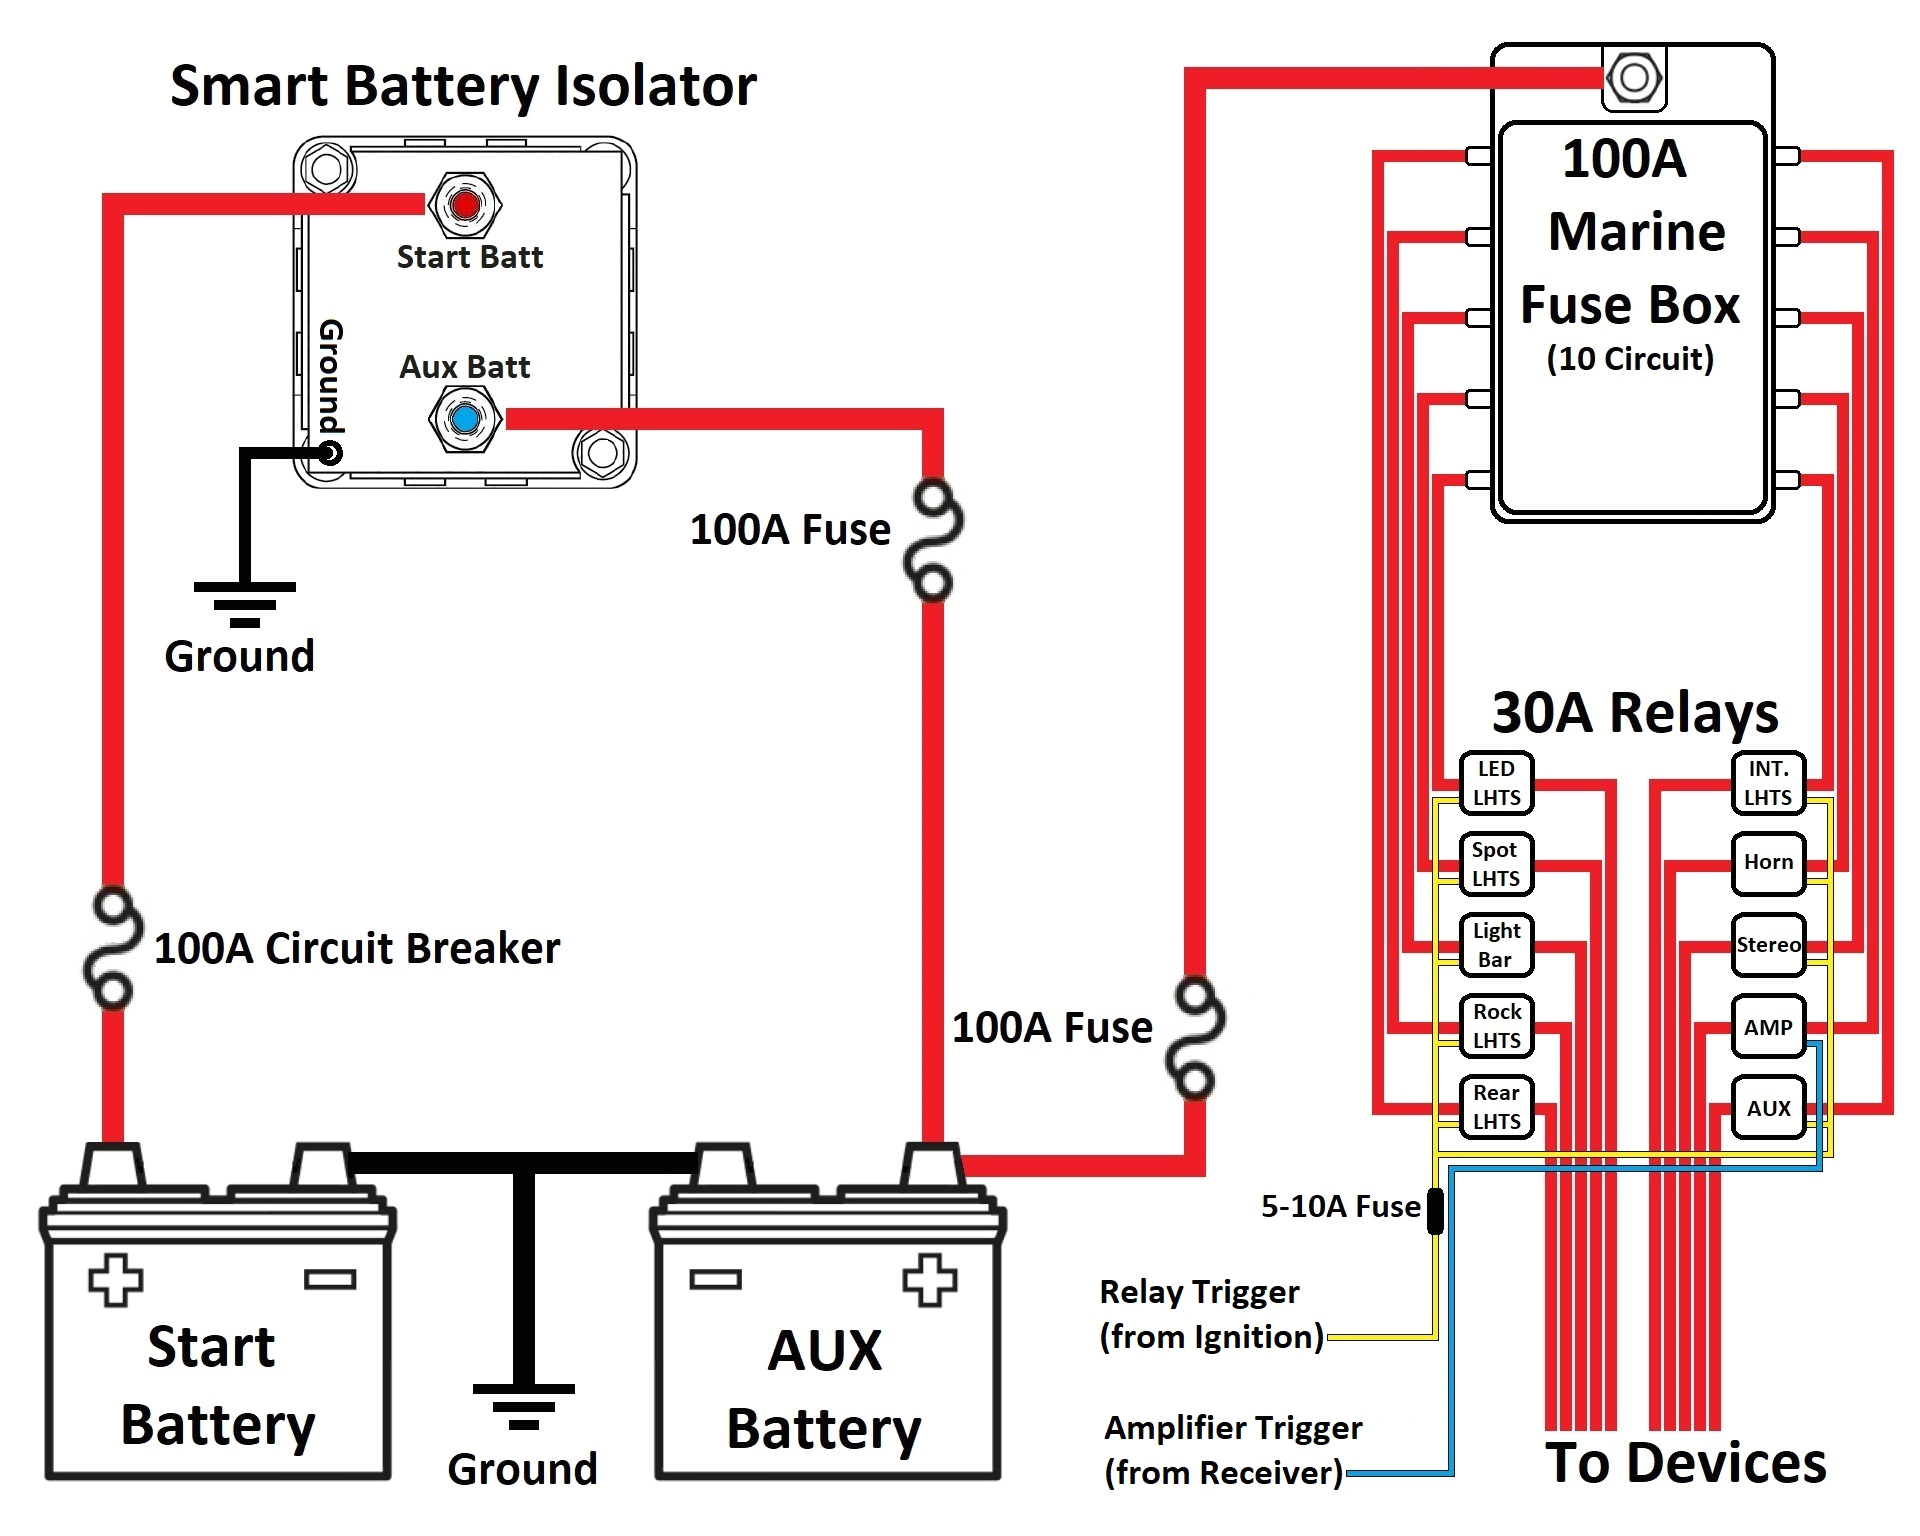 How to Wire A Battery isolator Diagram Smart Battery isolator Dual Battery Wiring Diagram